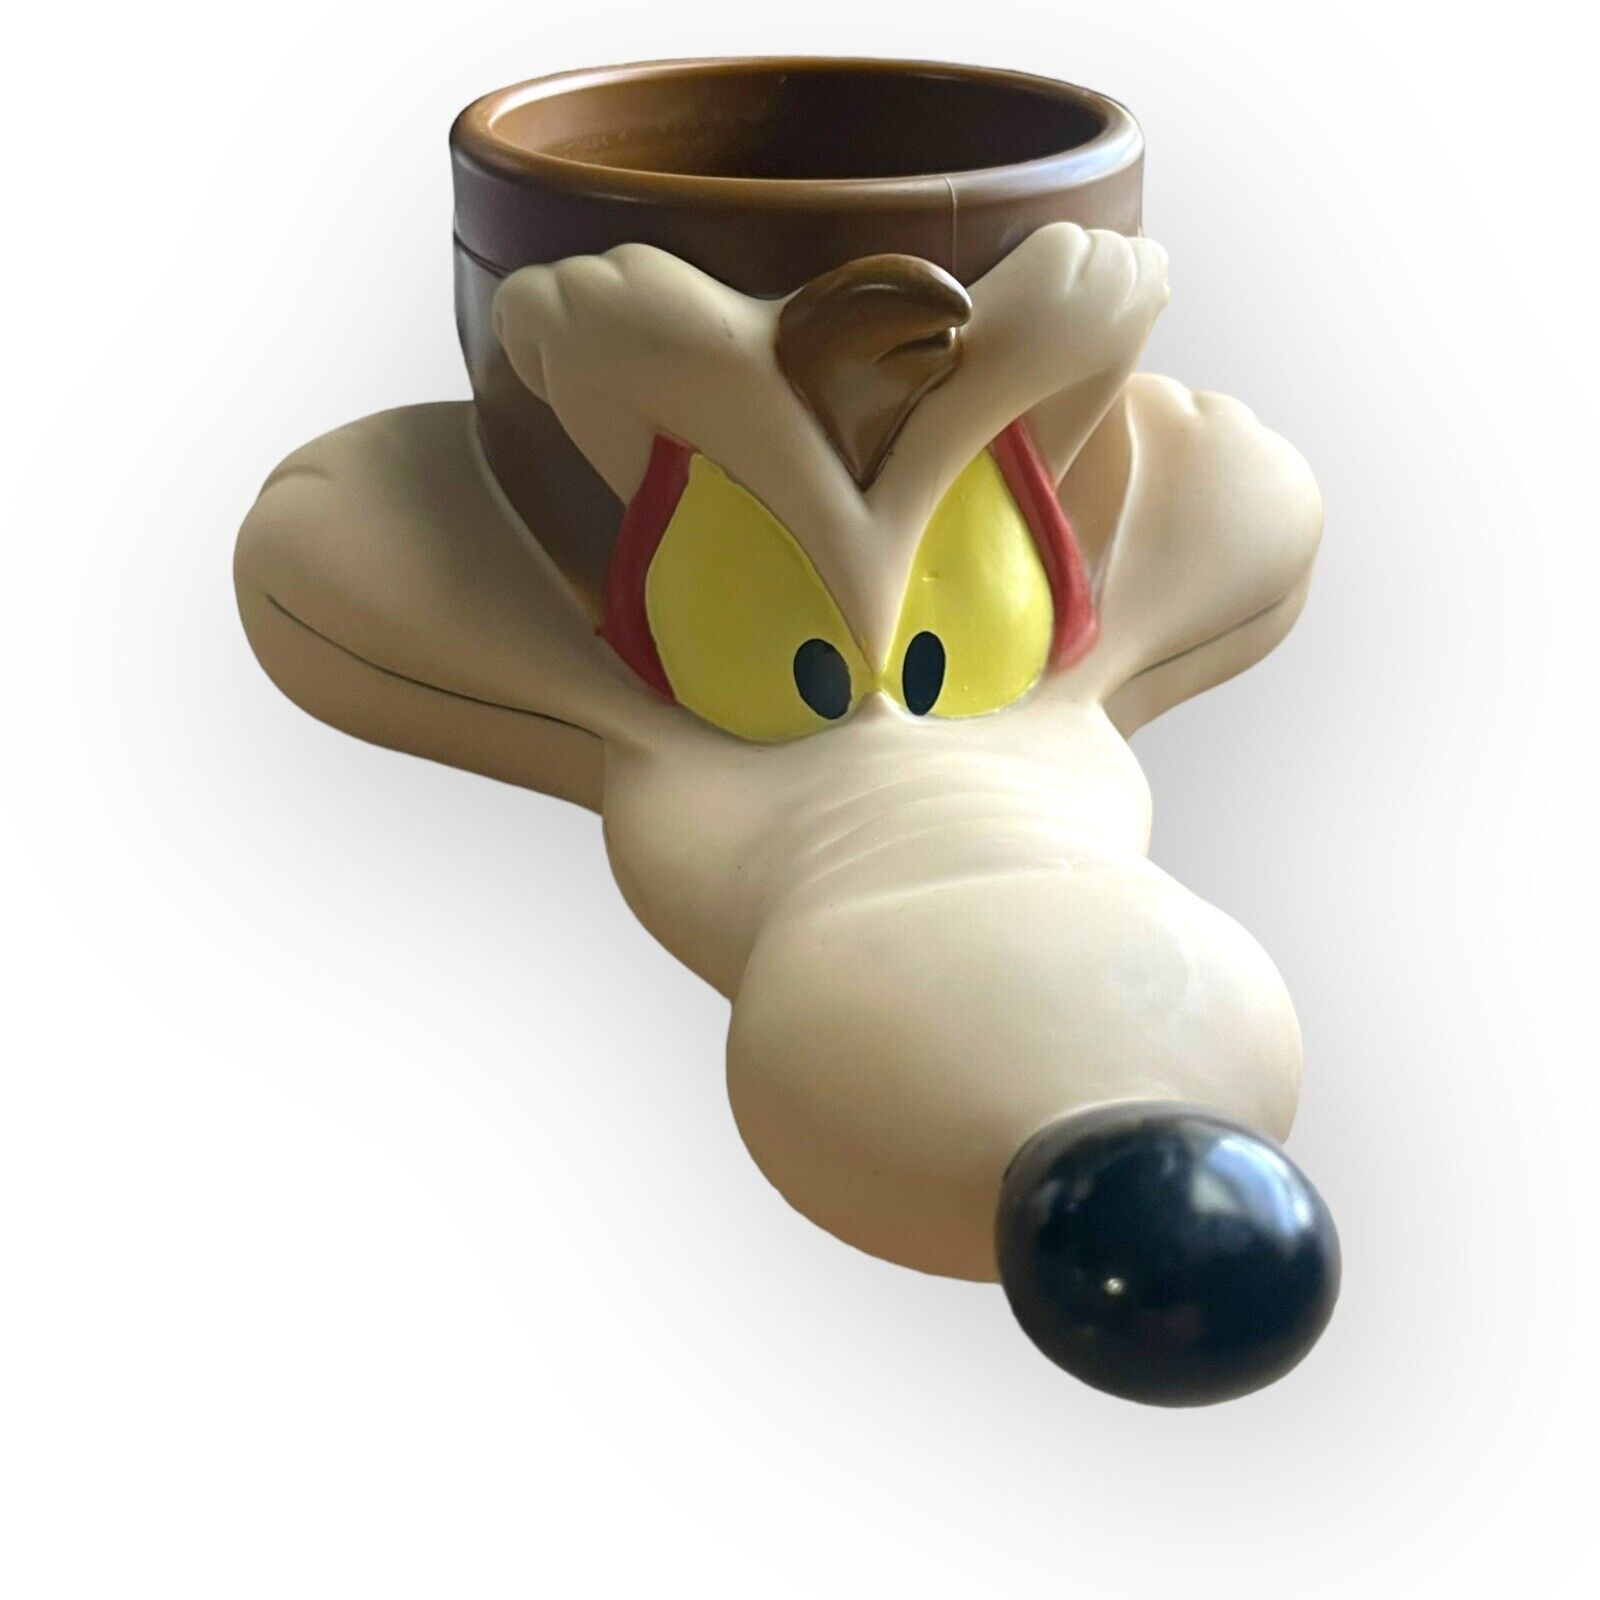 Vintage 1993 Warner Brothers Looney Tunes Wile E. Coyote 3D Mug/Cup